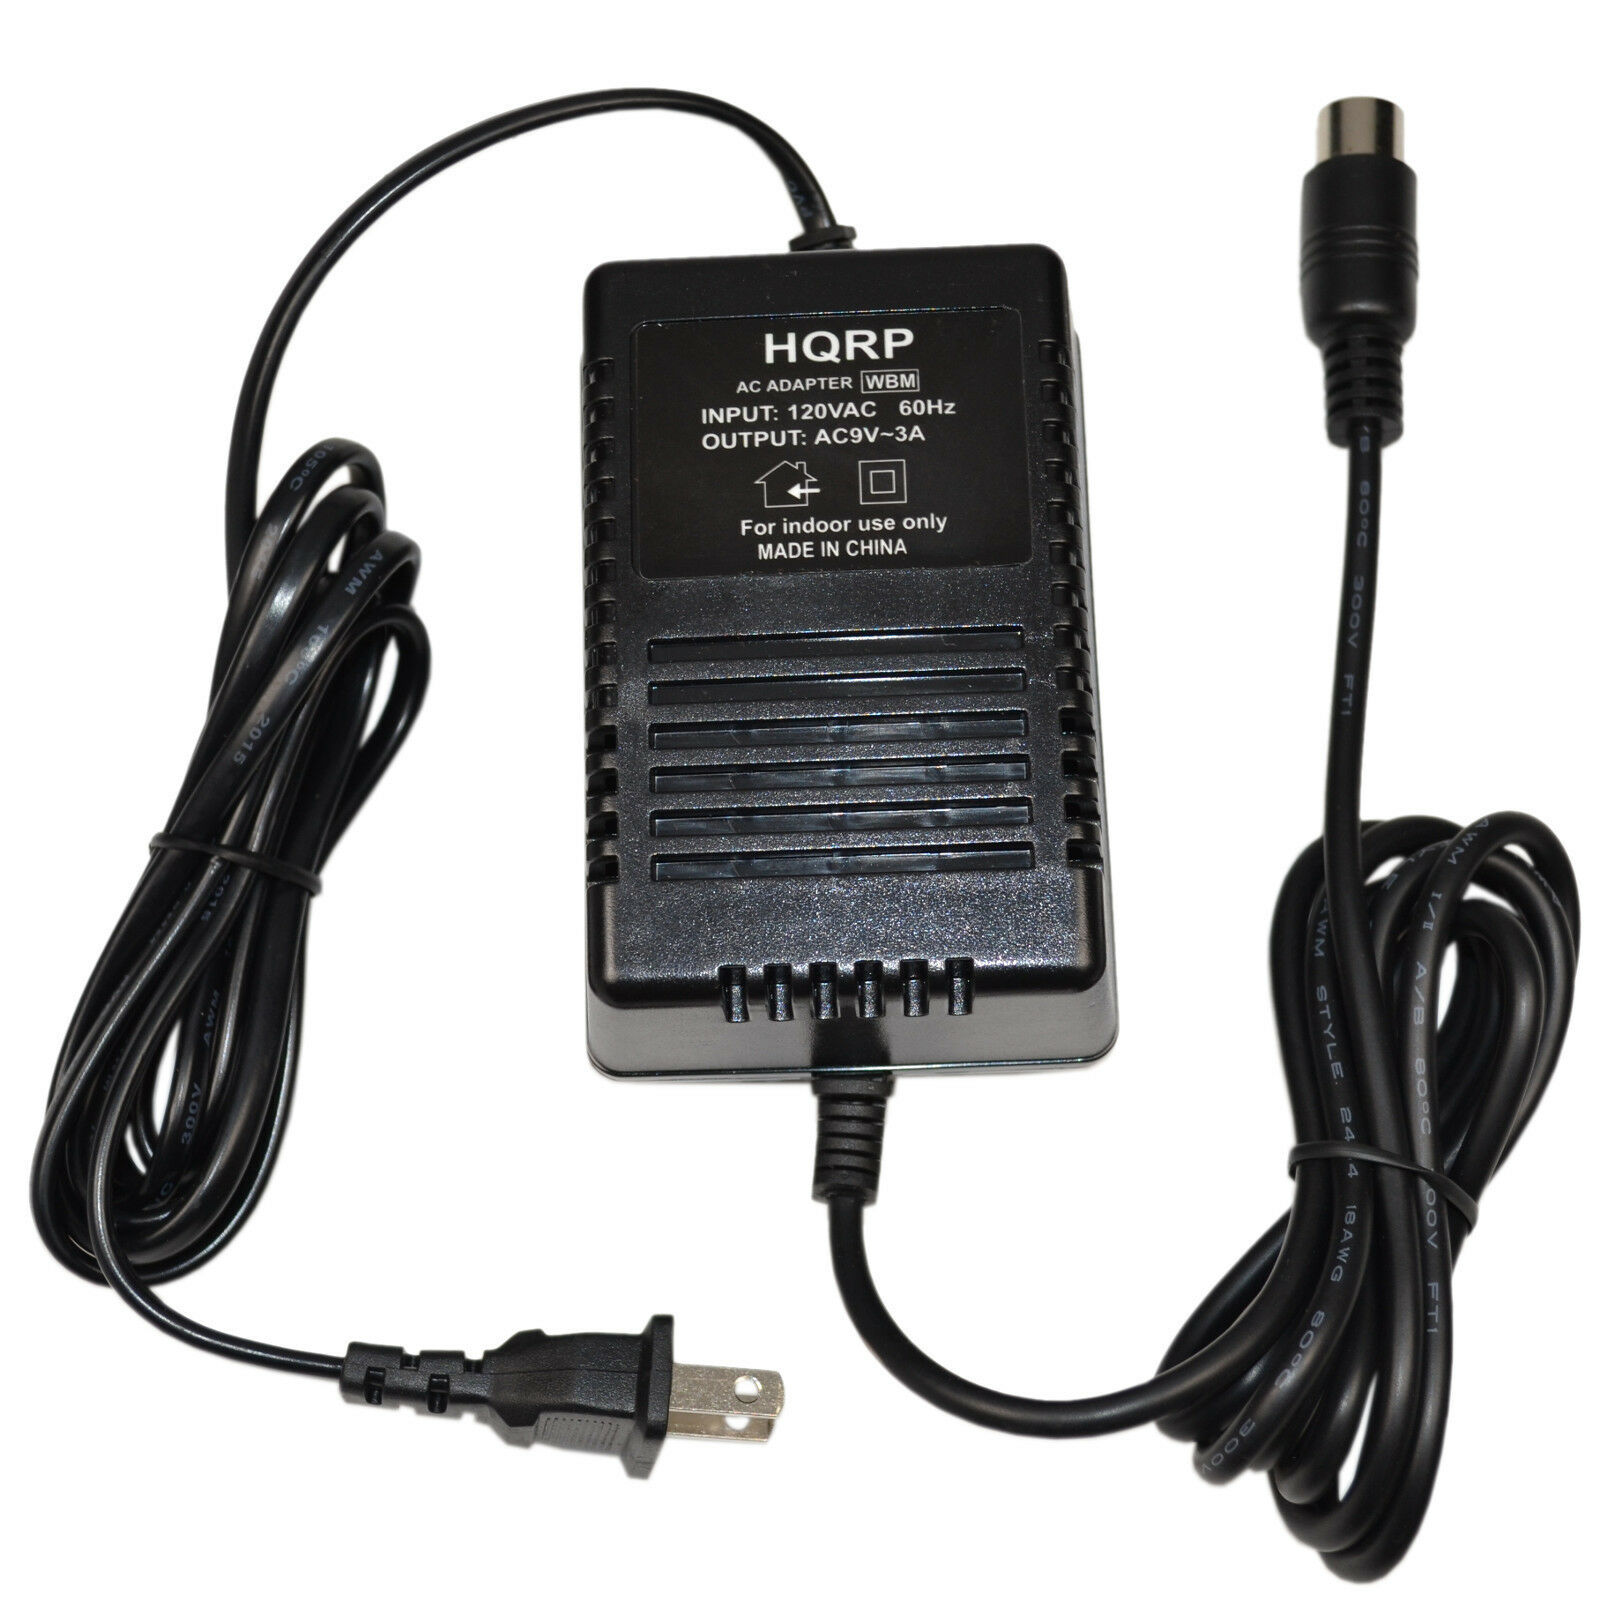 AC Power Adapter for Korg KM2, N1R, N5, TR88, SP500, TP-2, ESX-1, DL8000R Compatible Brand: For Ko - Click Image to Close